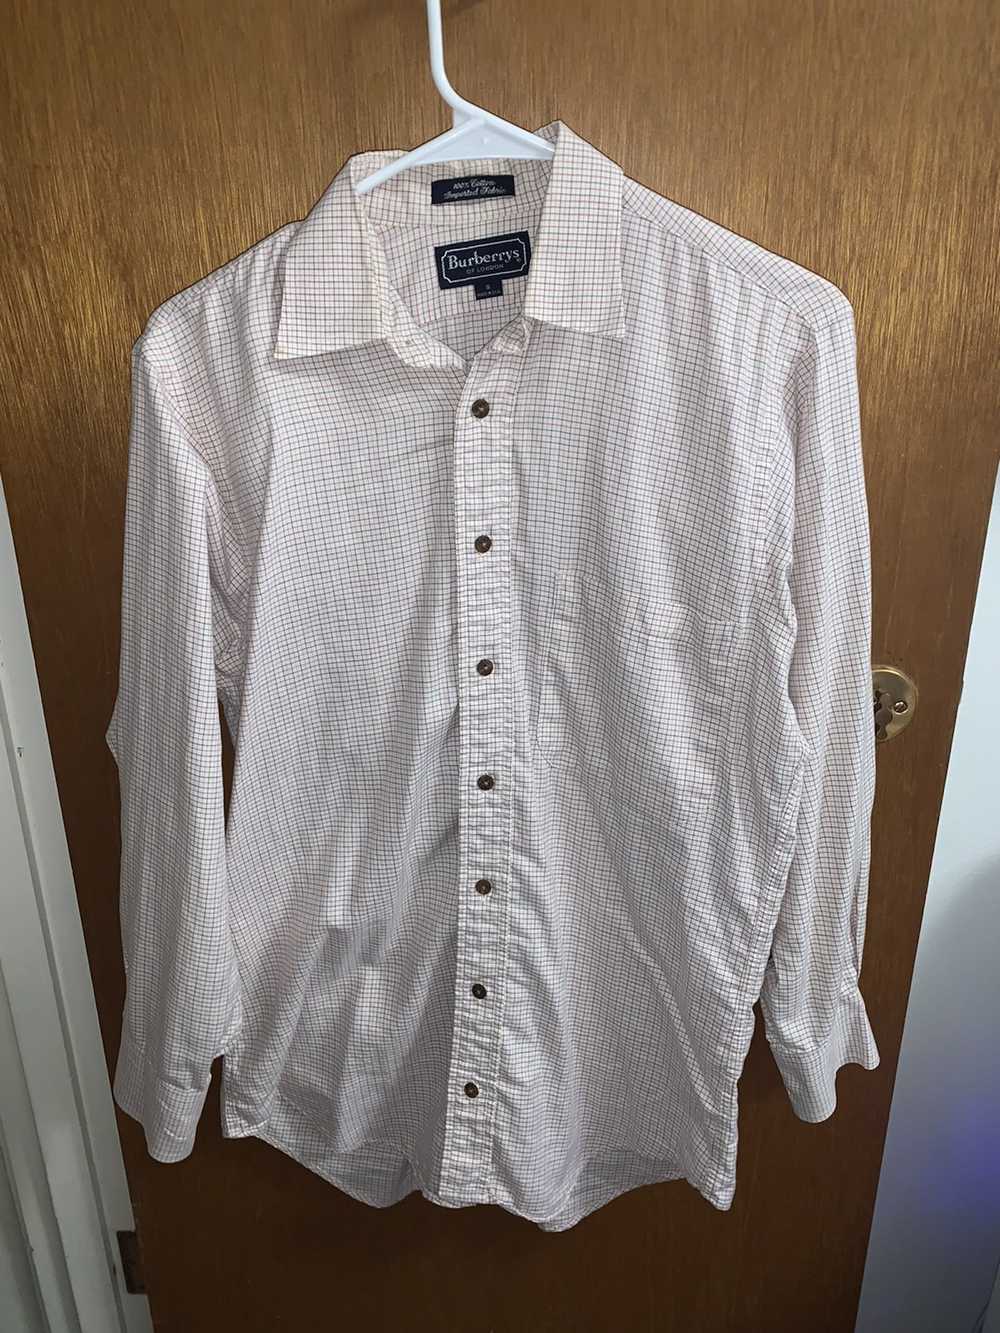 Burberry Burberry long sleeve button up - image 1